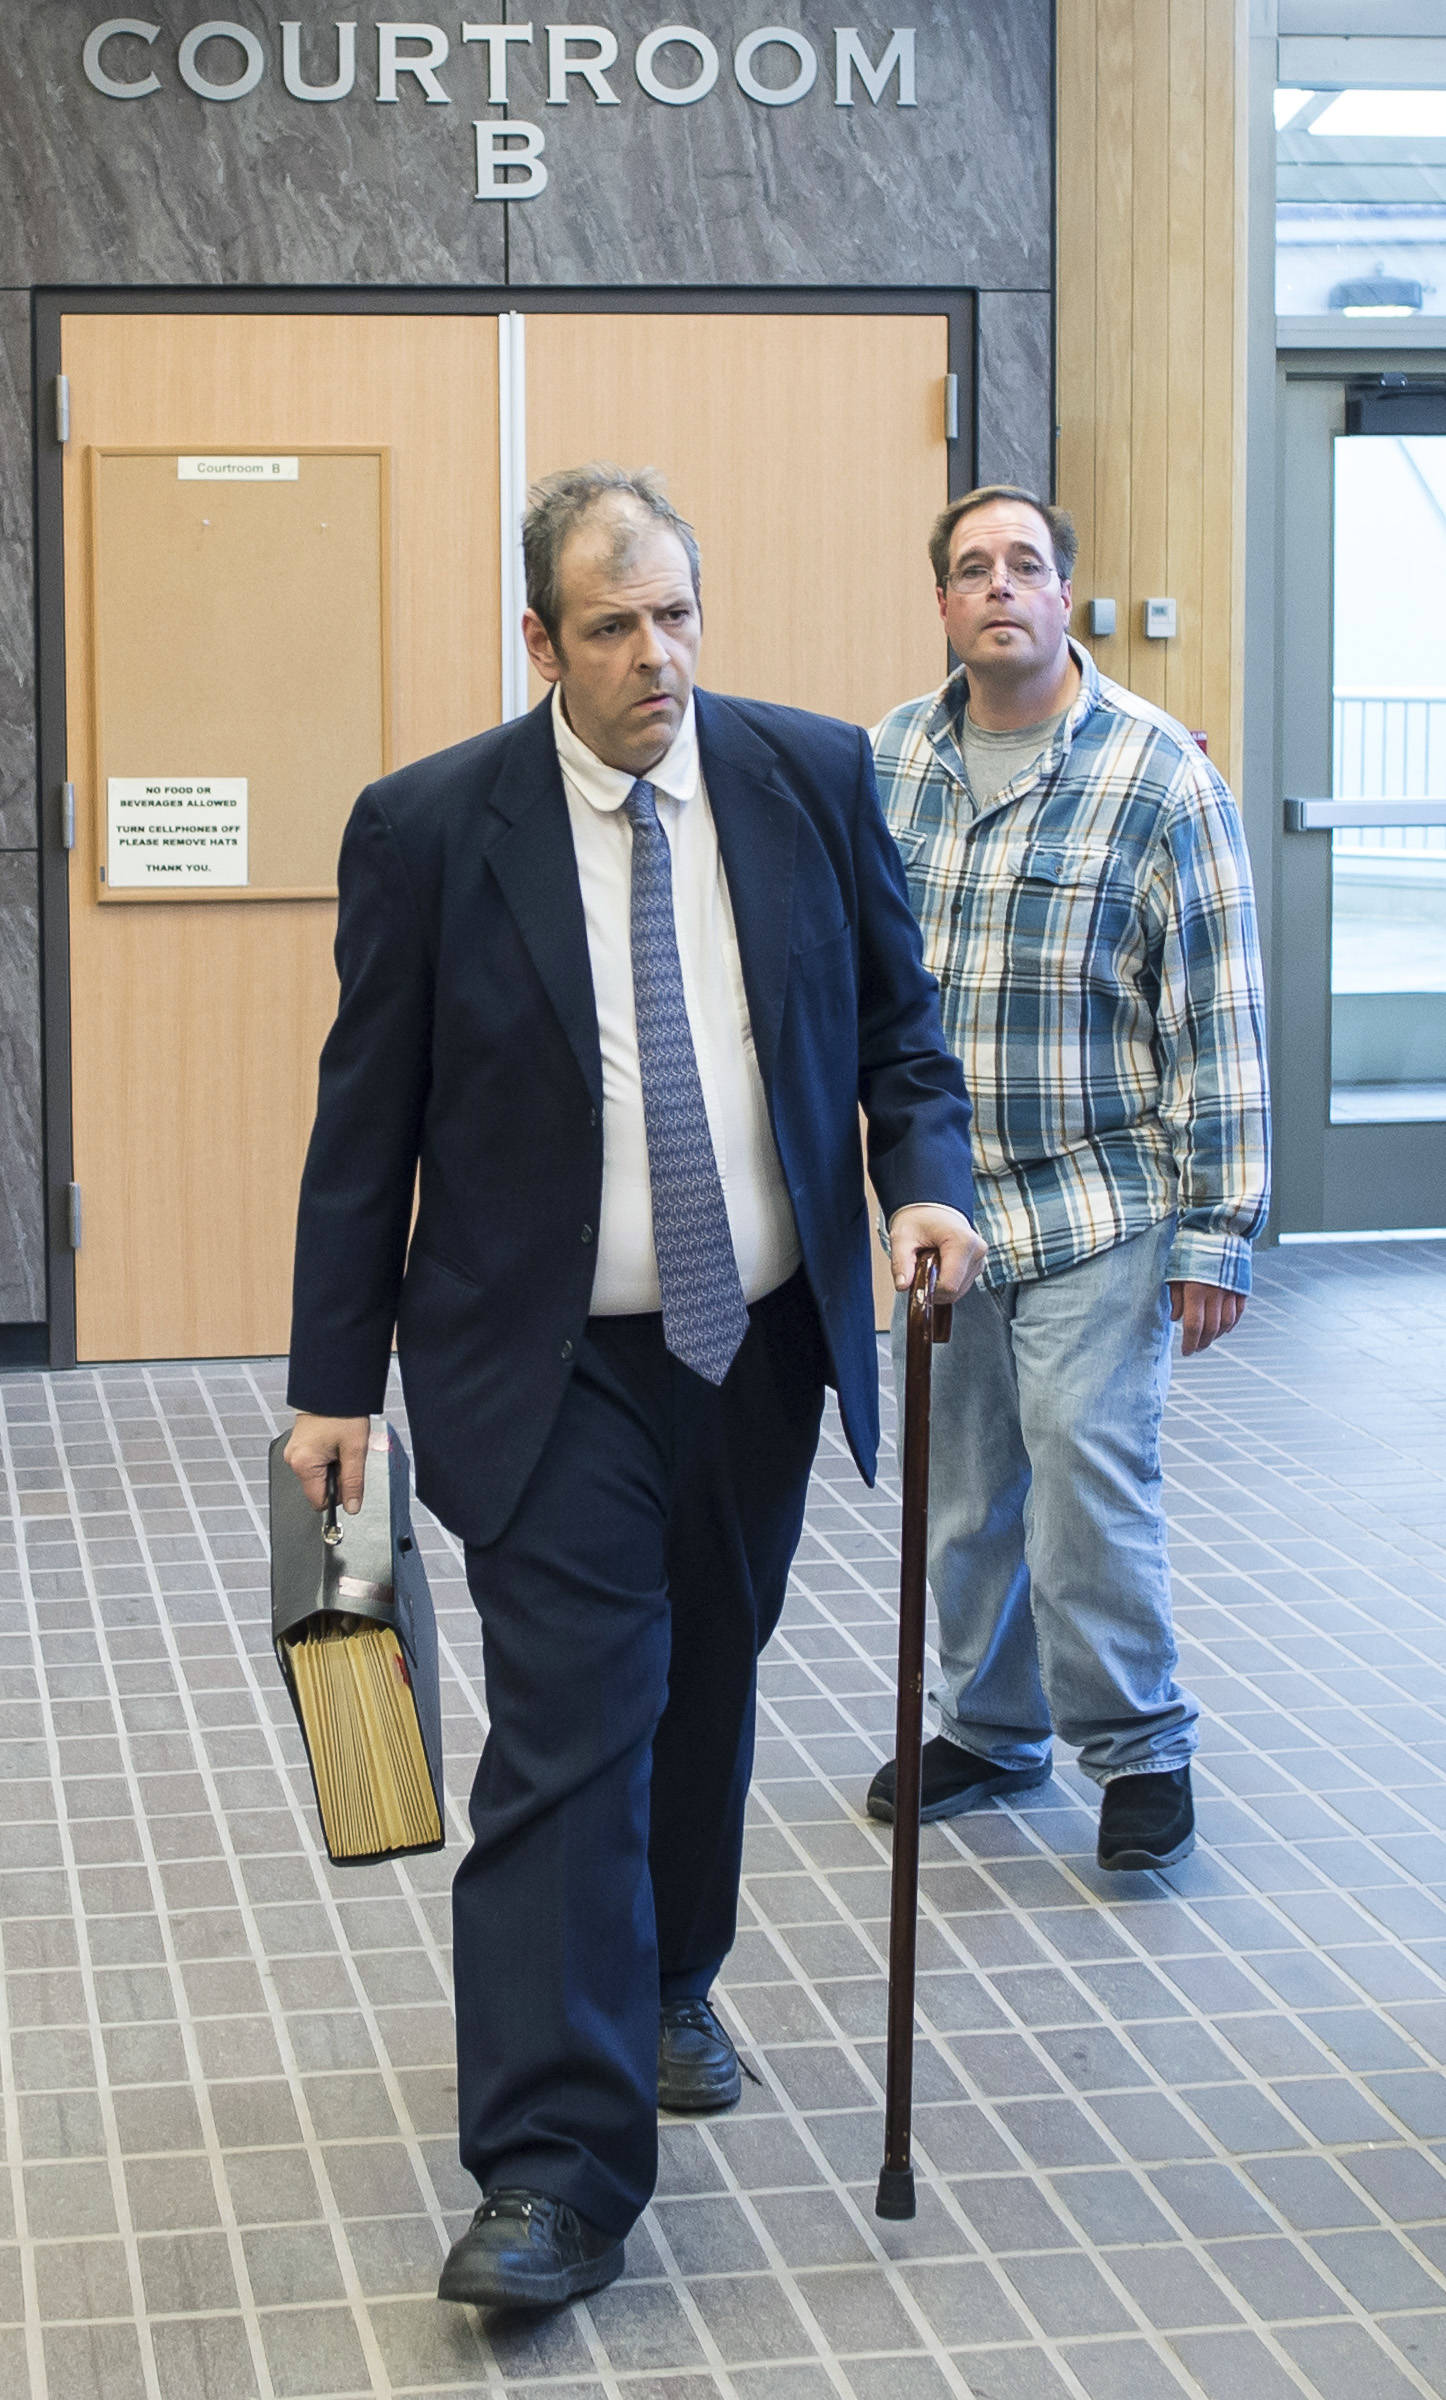 James Barrett appears for his court hearing at the Dimond Courthouse on Thursday, Sept. 6, 2018. Barrett is fighting being evicted from his house at Harris and 4th Street he co-owns with his mother, Kathleen. (Michael Penn | Juneau Empire)